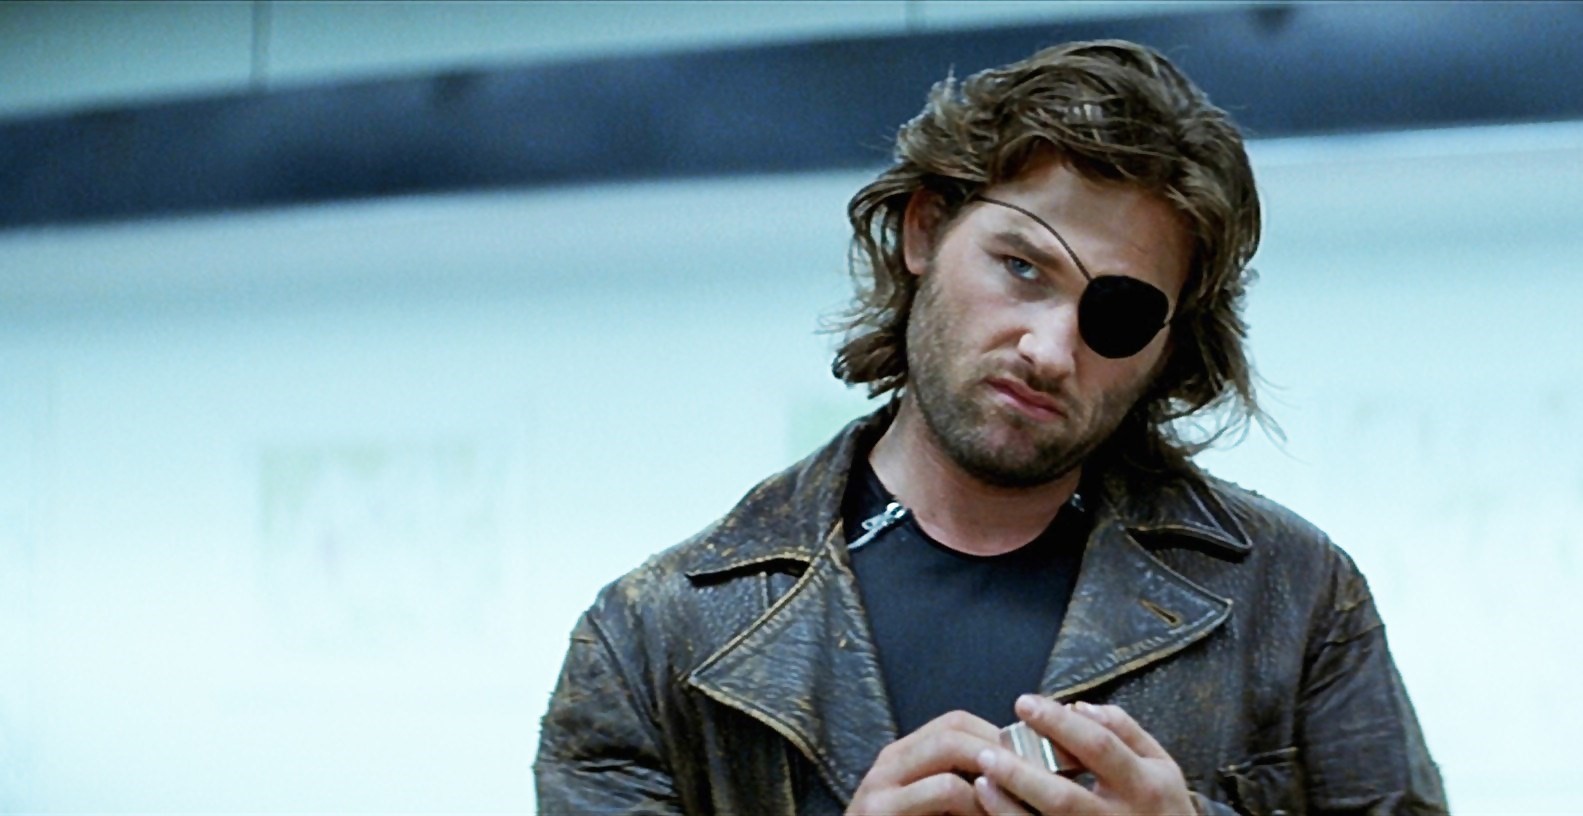 The Escape From New York & L.A. Page - A Tribute to Snake Plissken